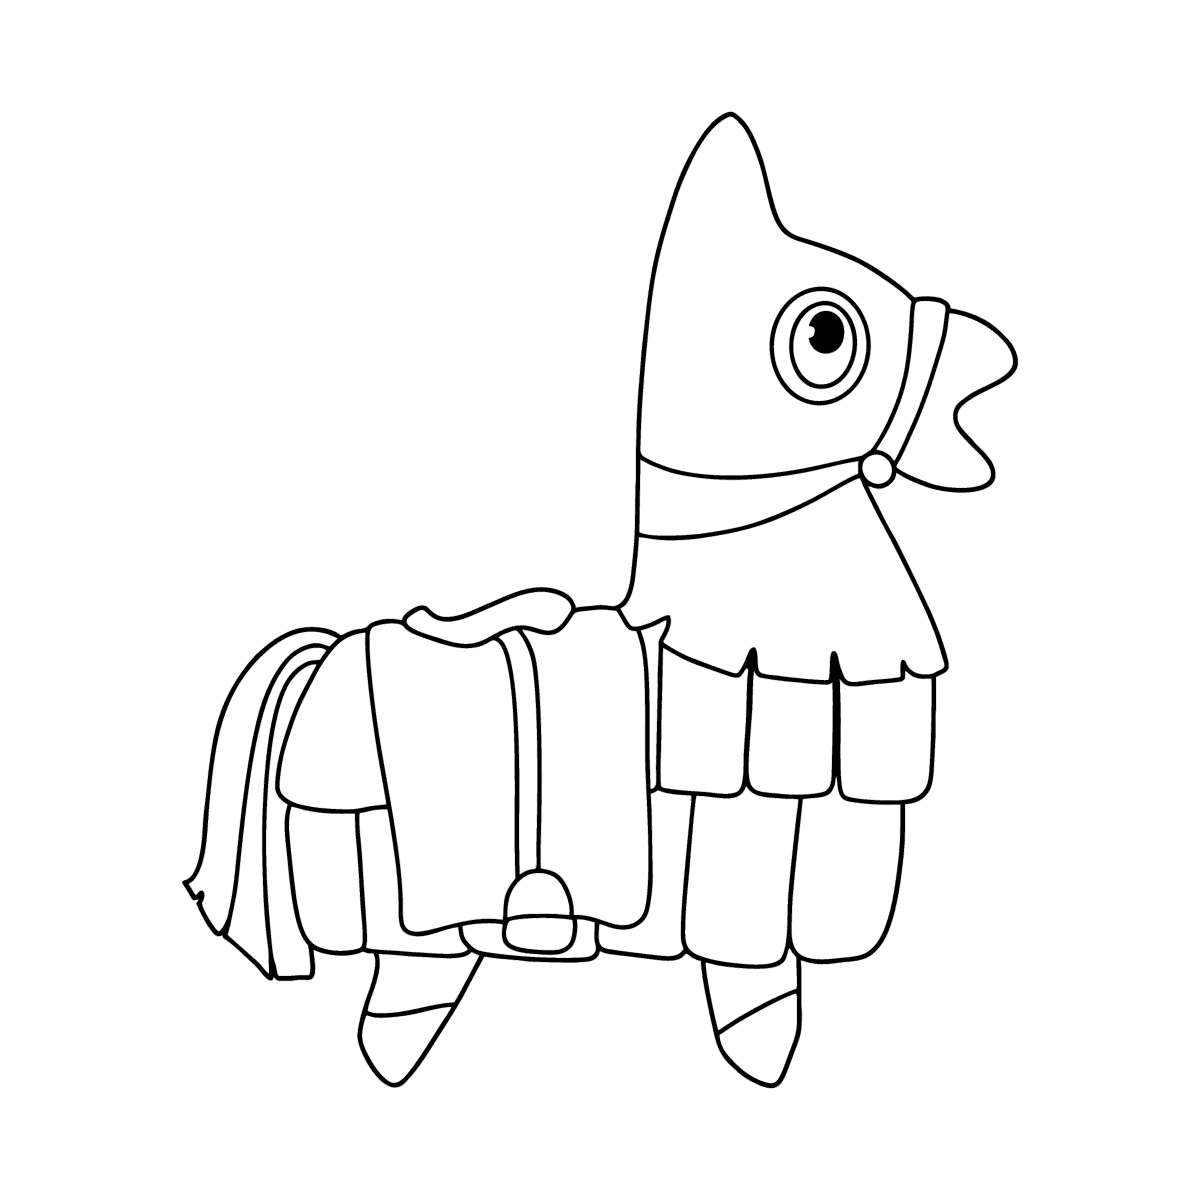 Fortnite Llama coloring page ♥ Online and Print for Free!